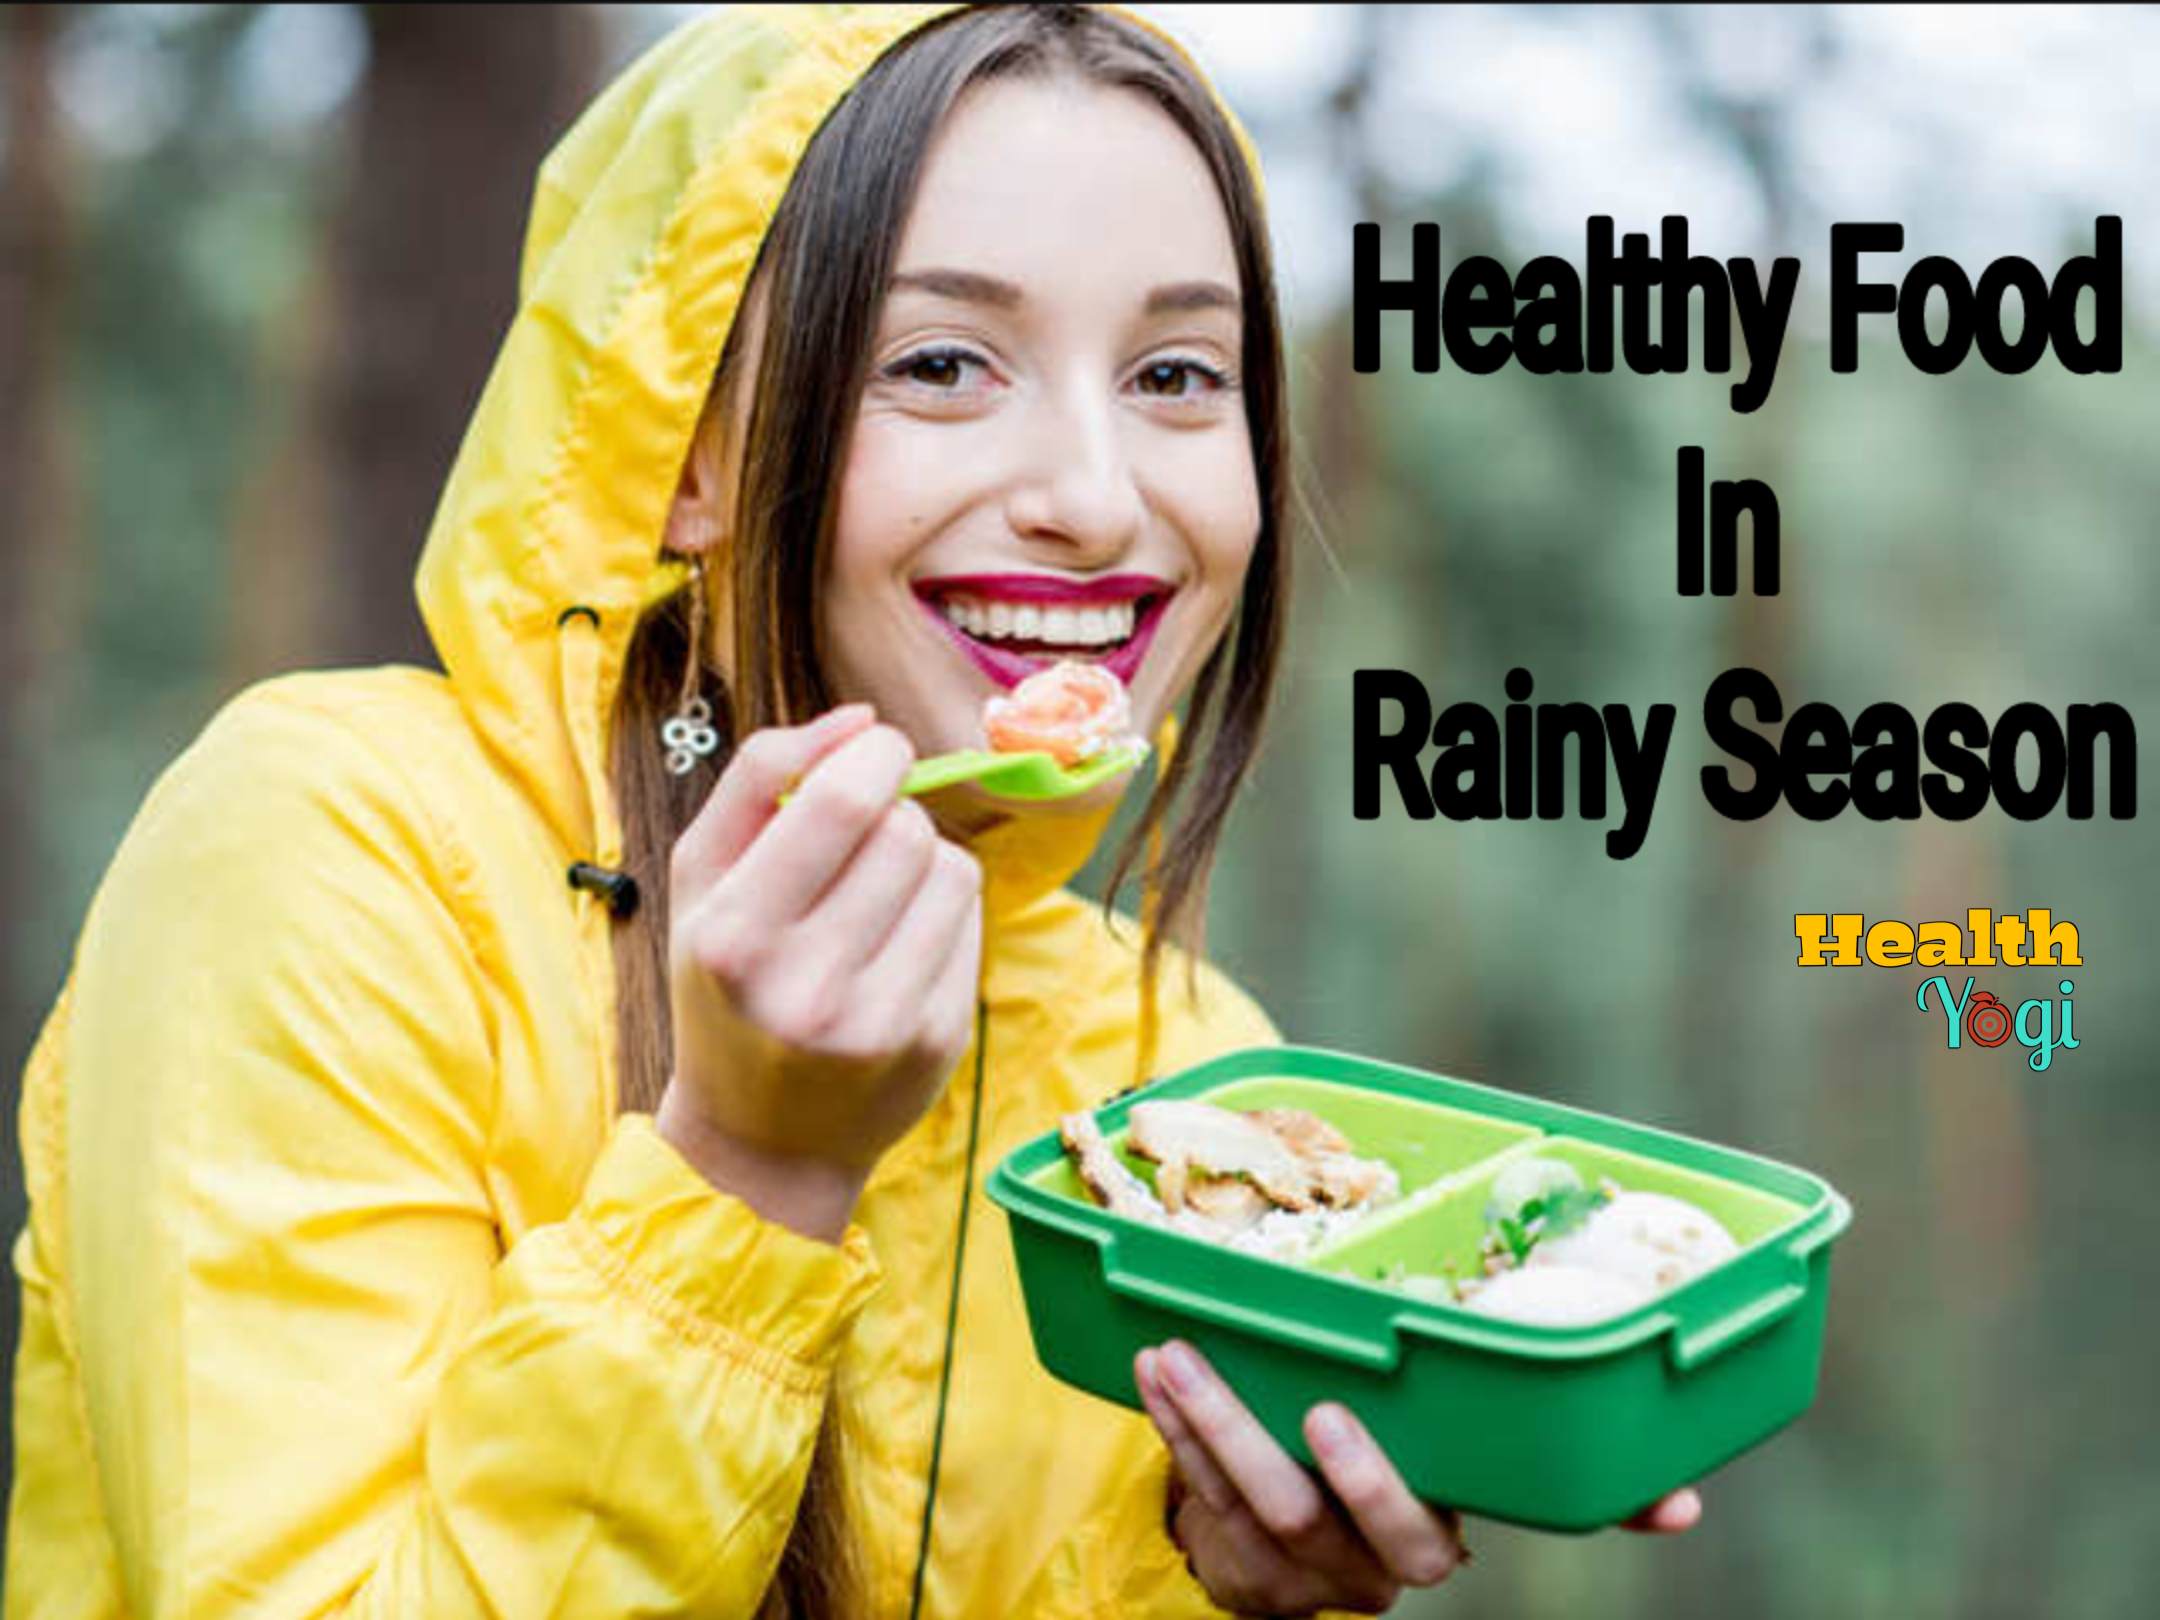 Best healthy food for the rainy season in India